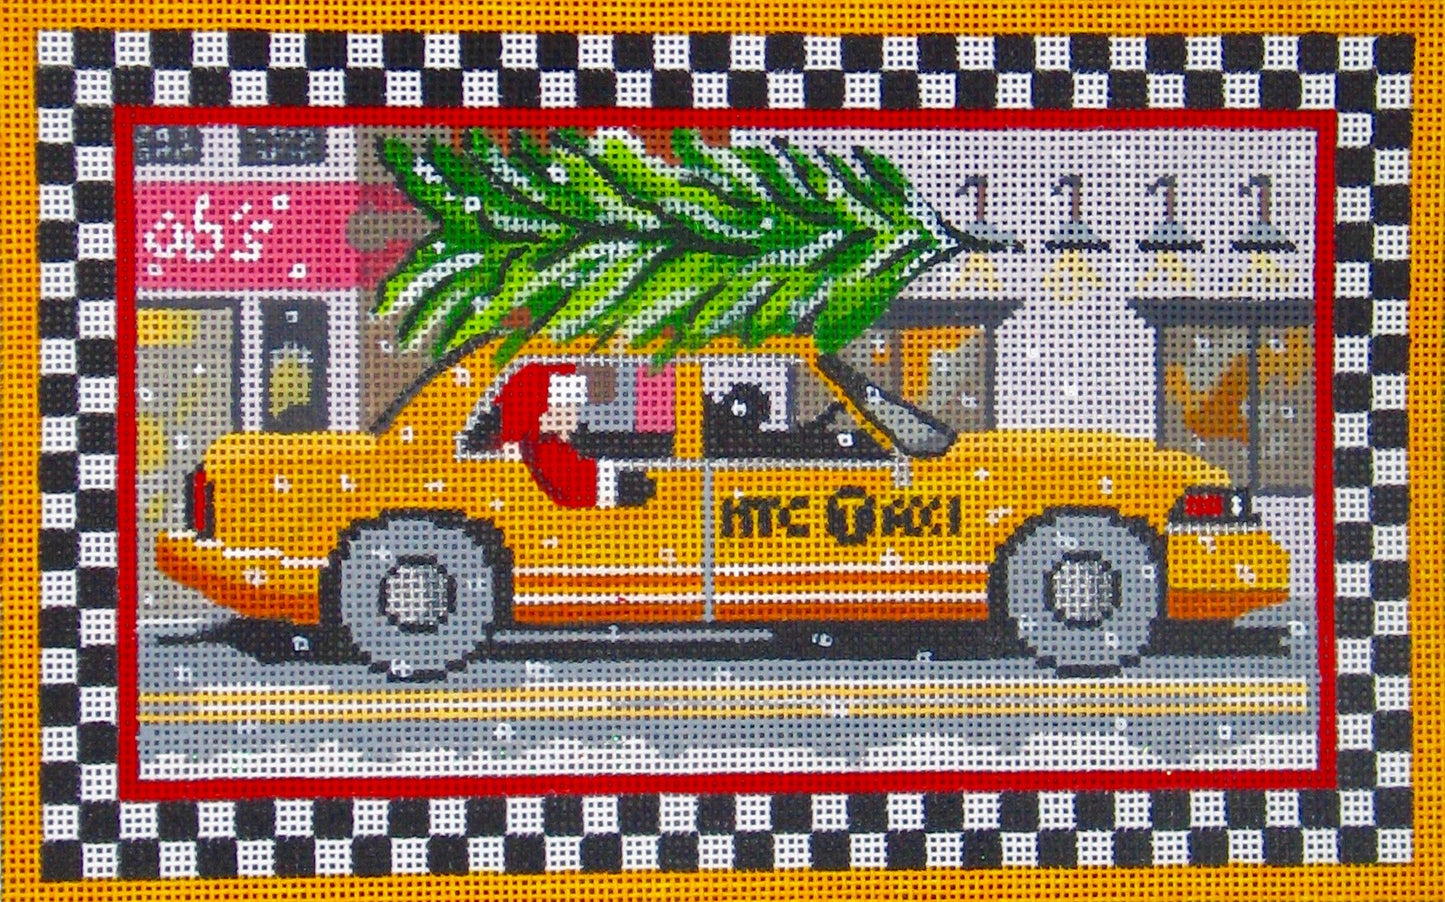 Amanda Lawford Christmas needlepoint canvas of Santa Claus riding in a New York City taxi cab with a Christmas tree on top